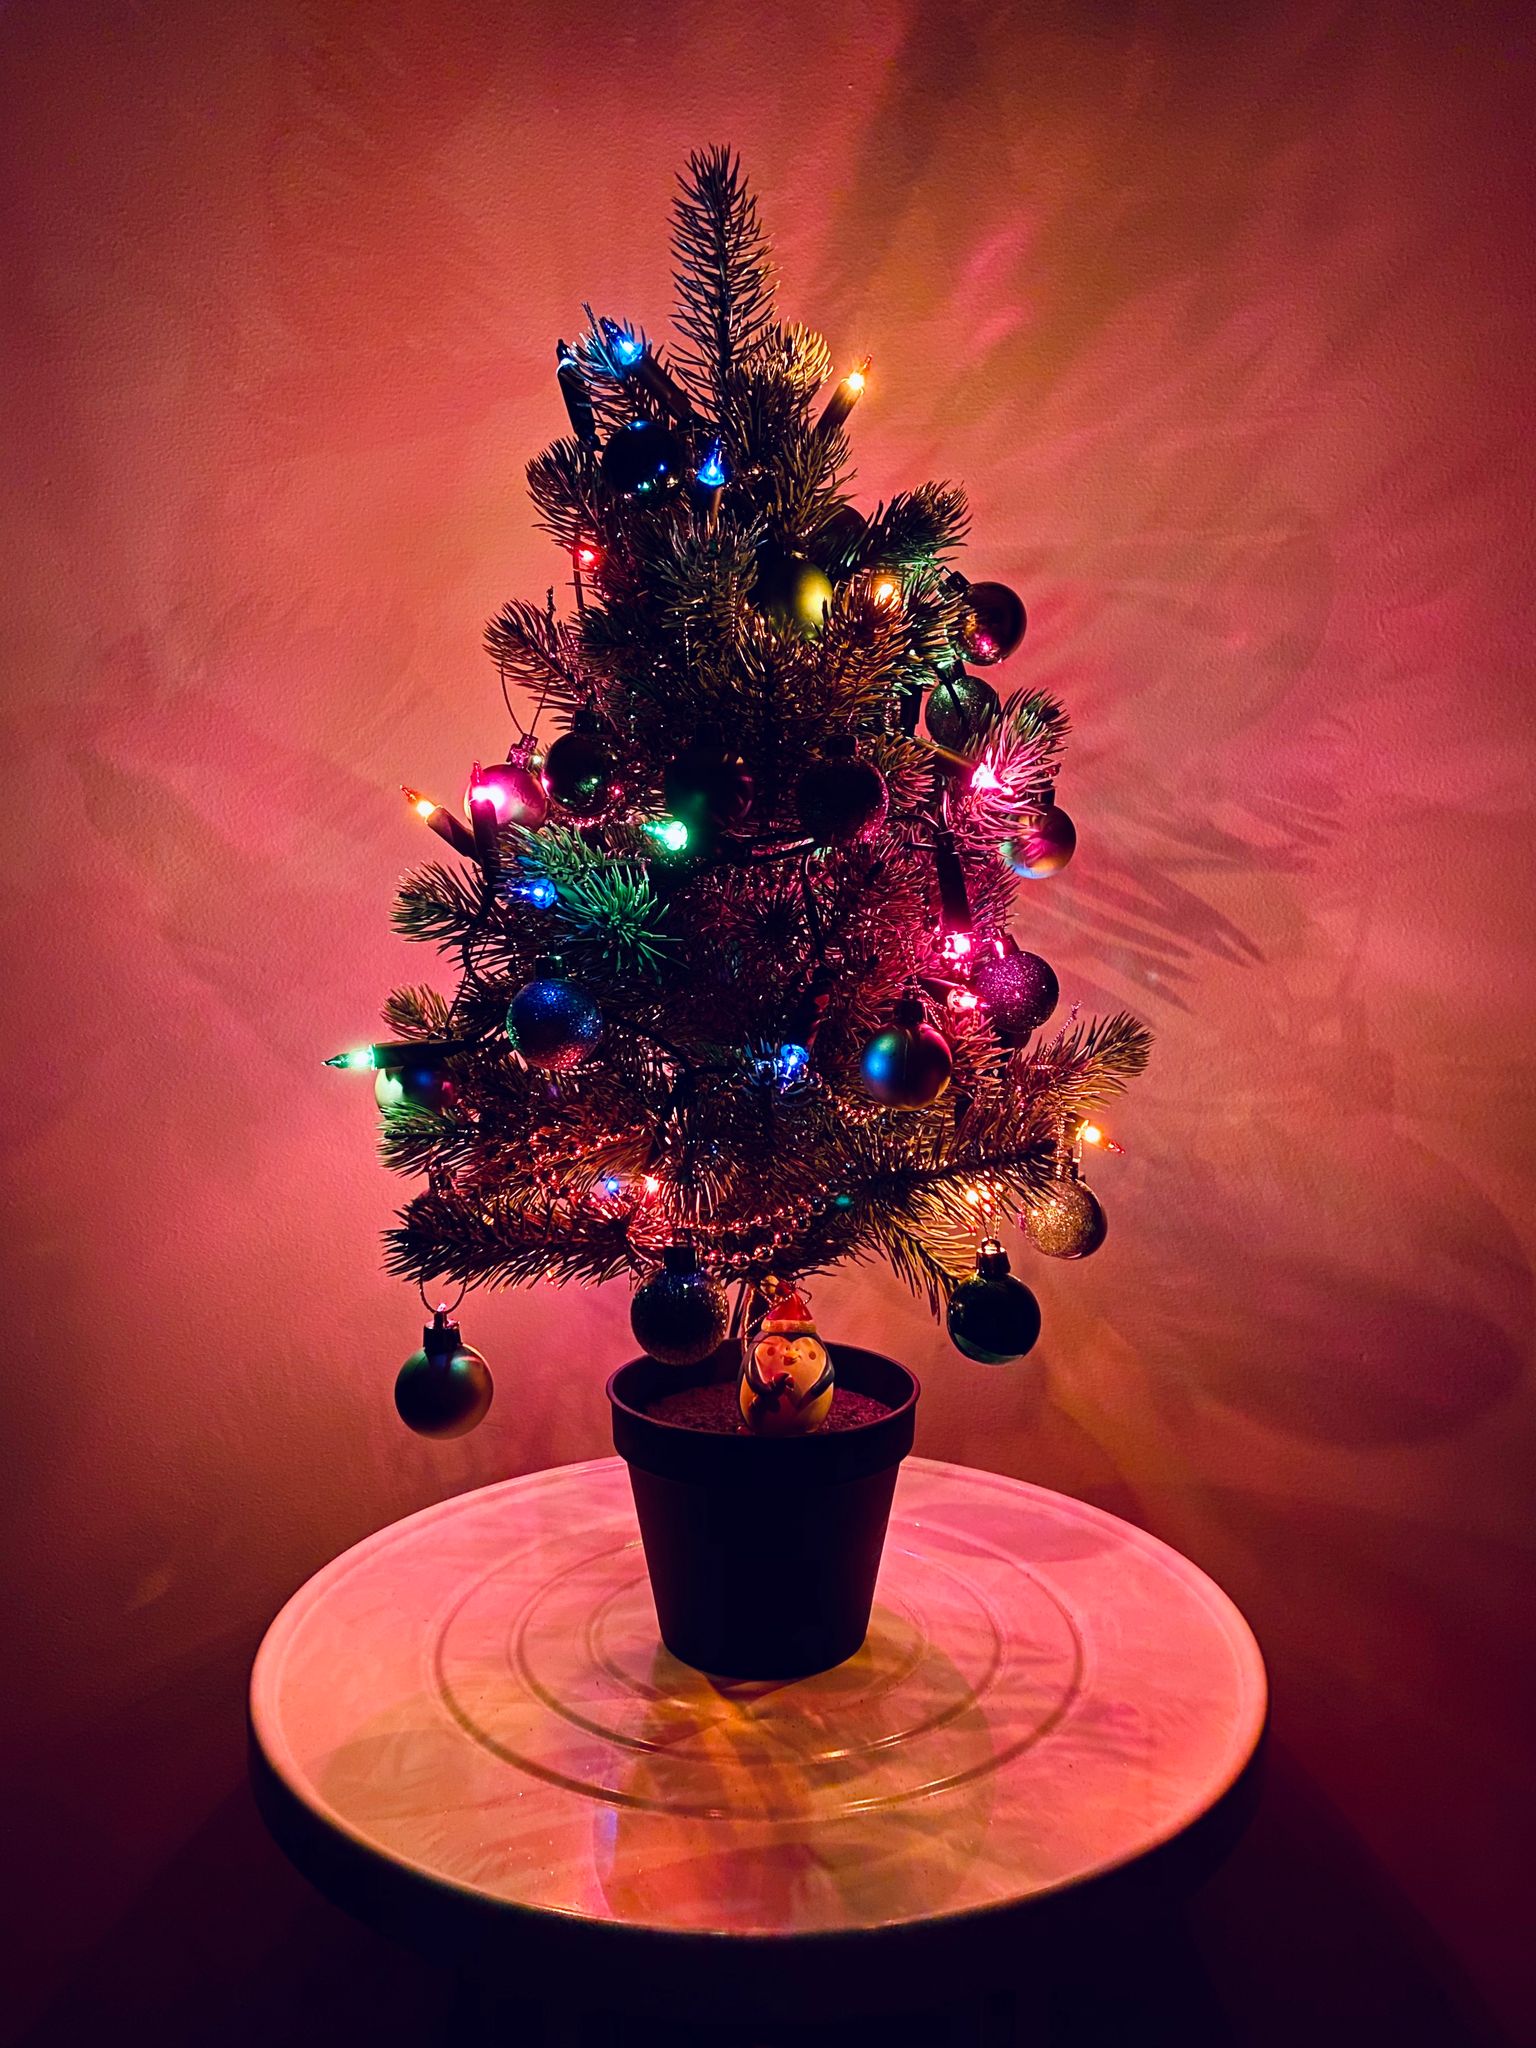 A photo of a Christmas tree covered in lights and shiny baubles, the whole scene is lit only by the light coming from the tree. It's sitting on a circular white pedestal and in the "pot" of the tree at the bottom is sitting a round little penguin figurine with a Santa hat on. He looks very happy.